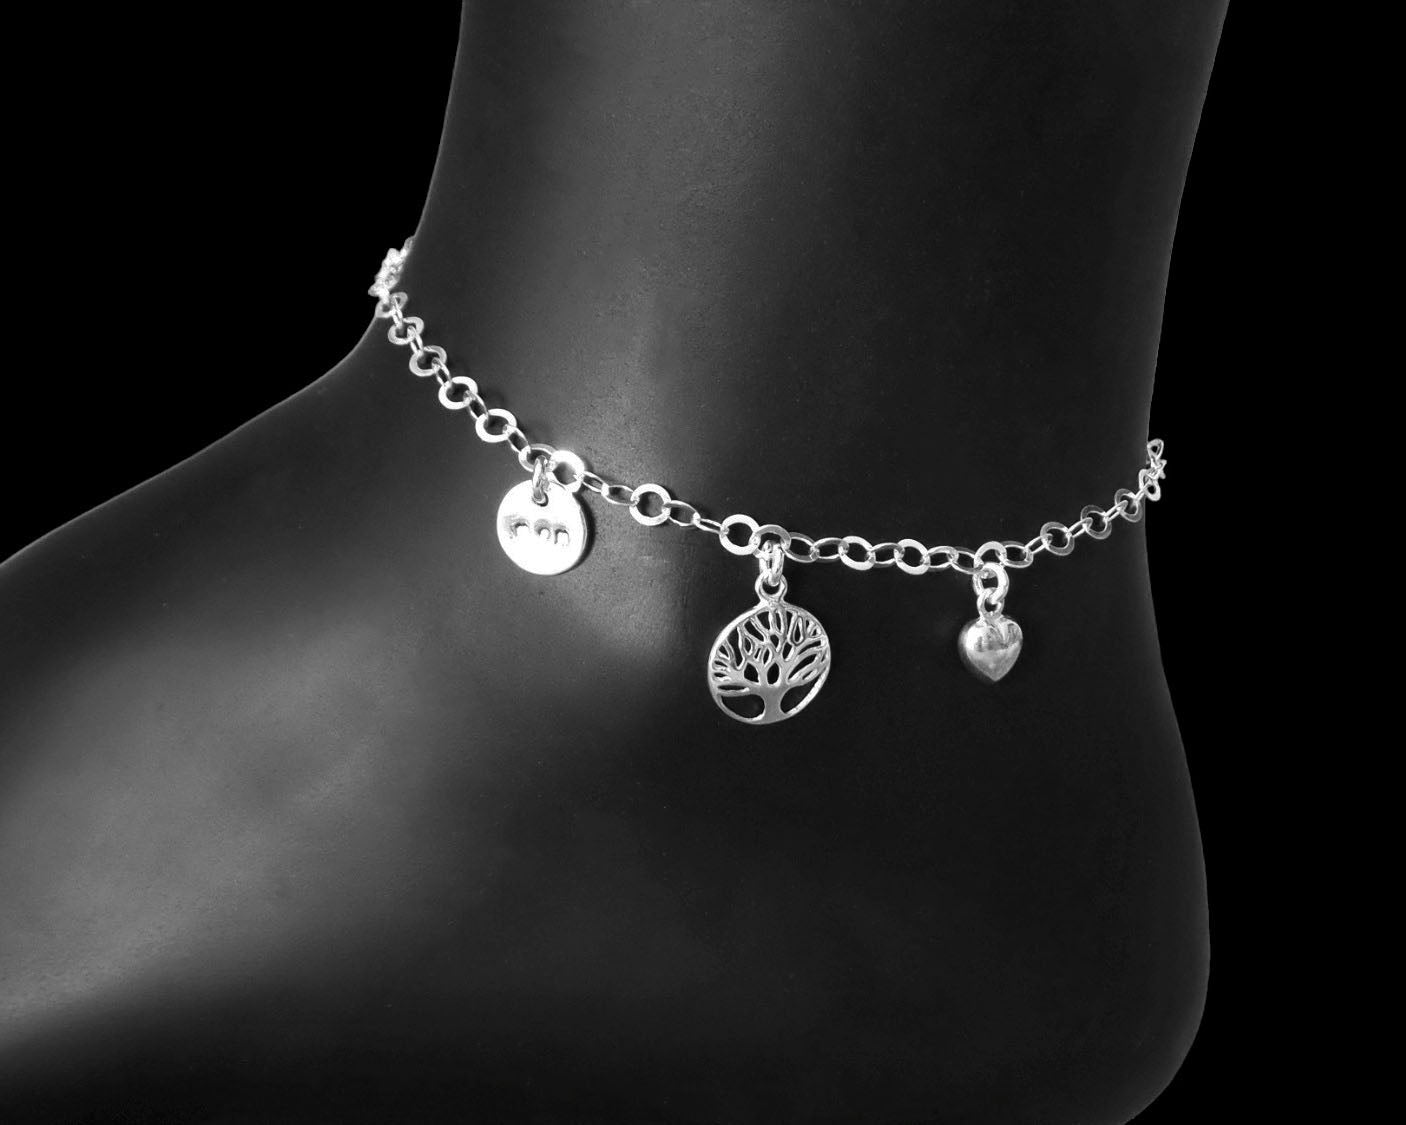 Mother Tree of Life, Heart, Mom Ankle Bracelet / Anklet, Sterling Silver Chain anklet with Tree of Life and Heart Pendant featuring a hand stamped MOM pendant